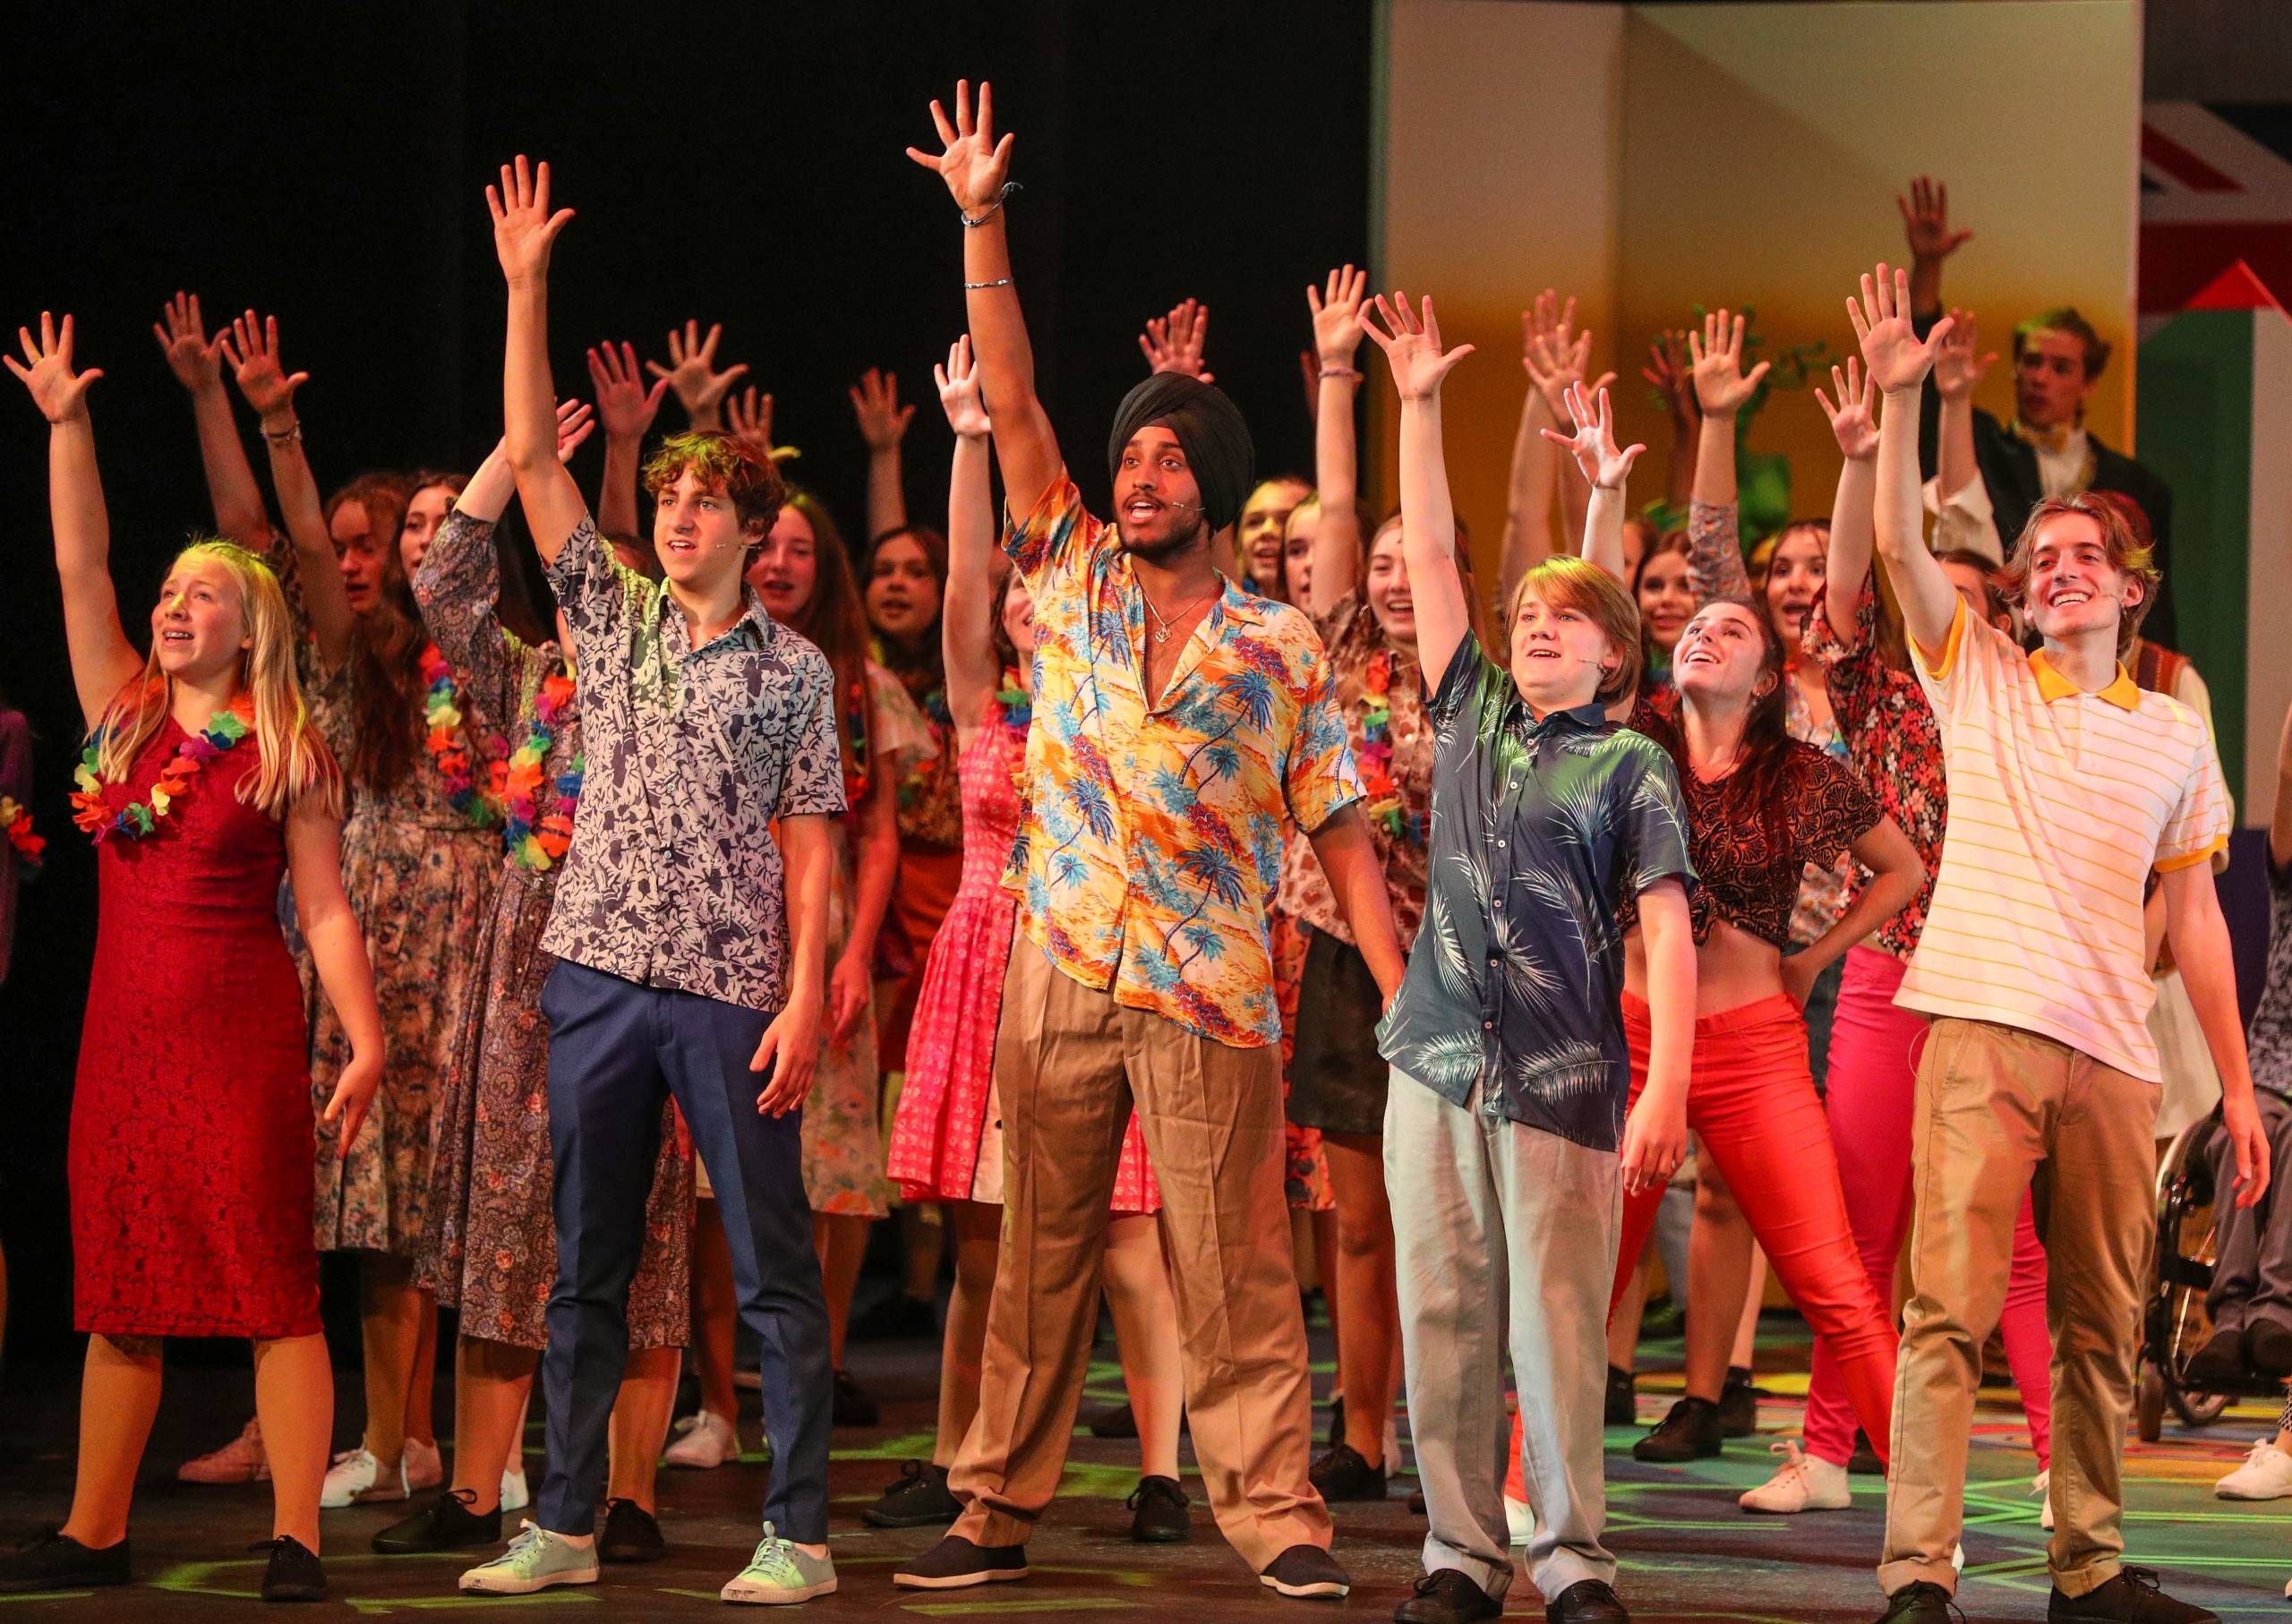 The cast of Summer Holiday raise their right arm in the air with their hands spread open. They are wearing summer shirts and dresses.